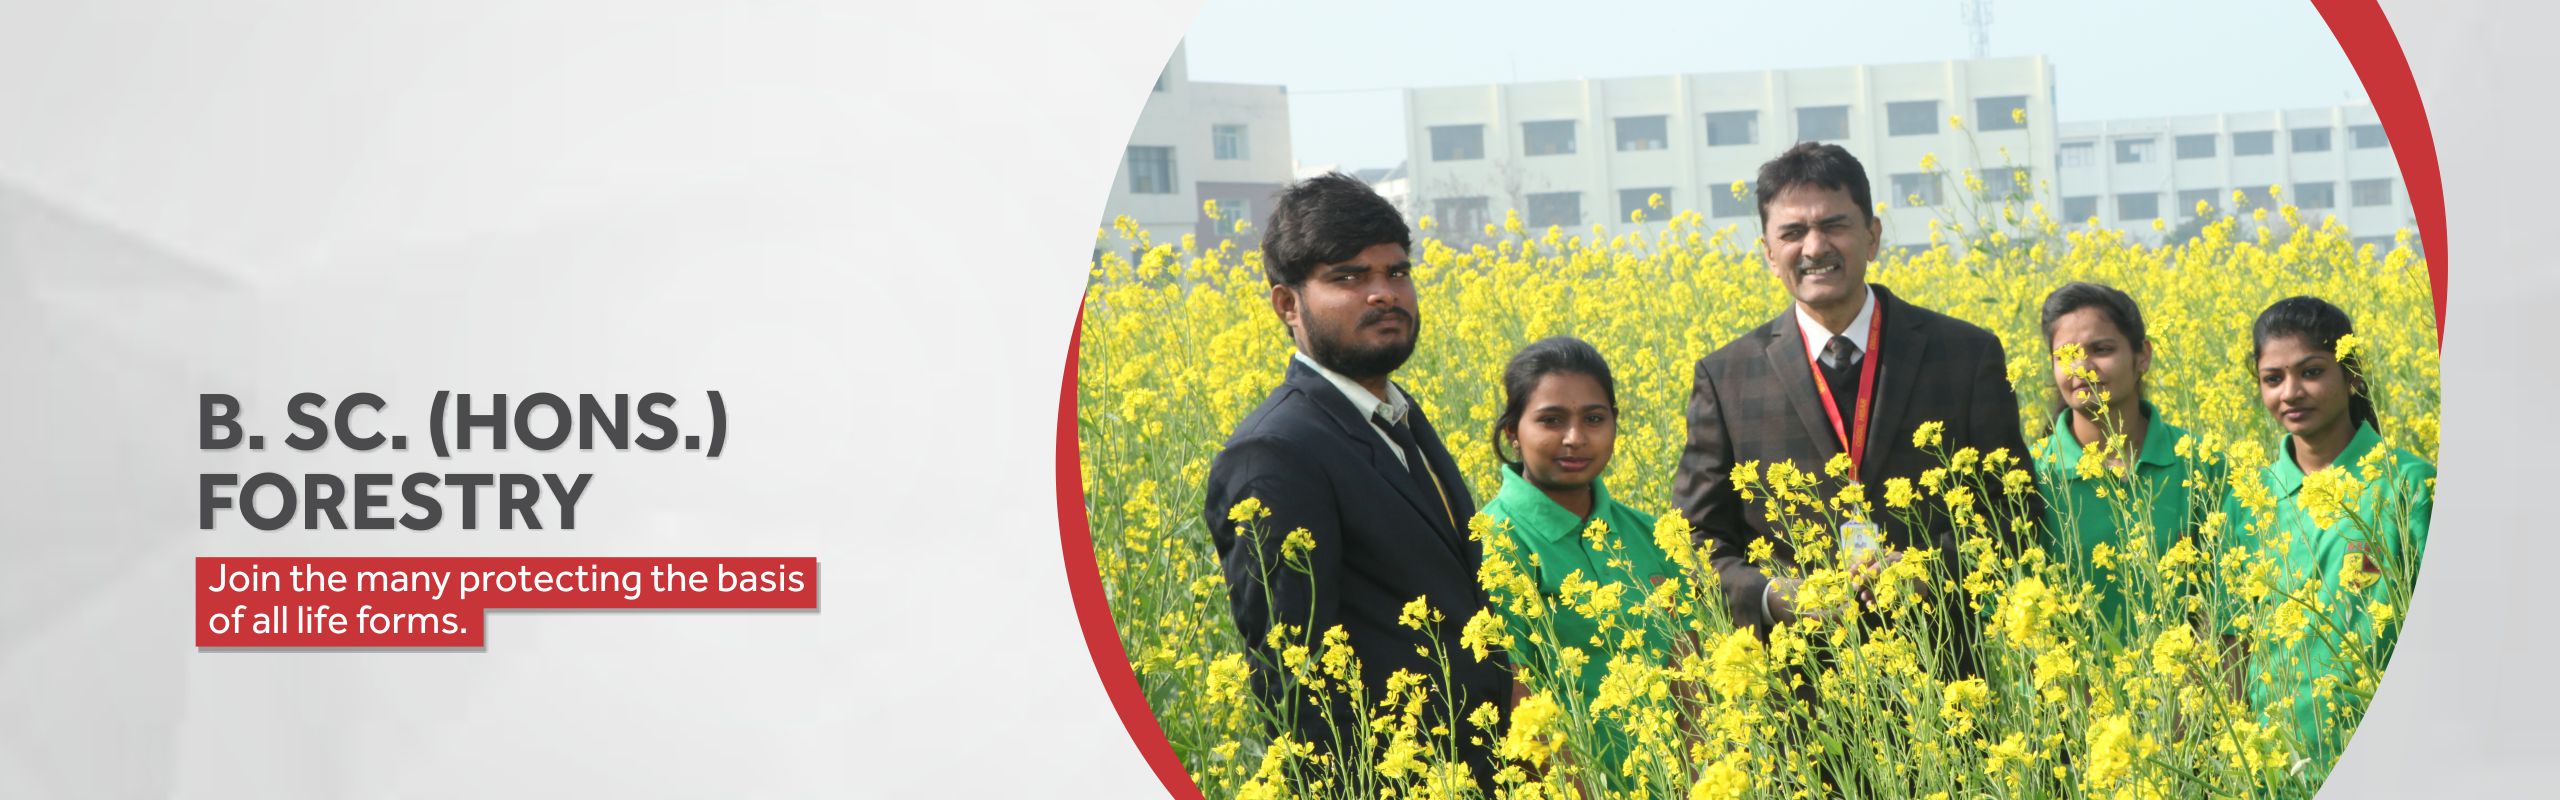 B.Sc. Forestry Course/College in Haryana, India